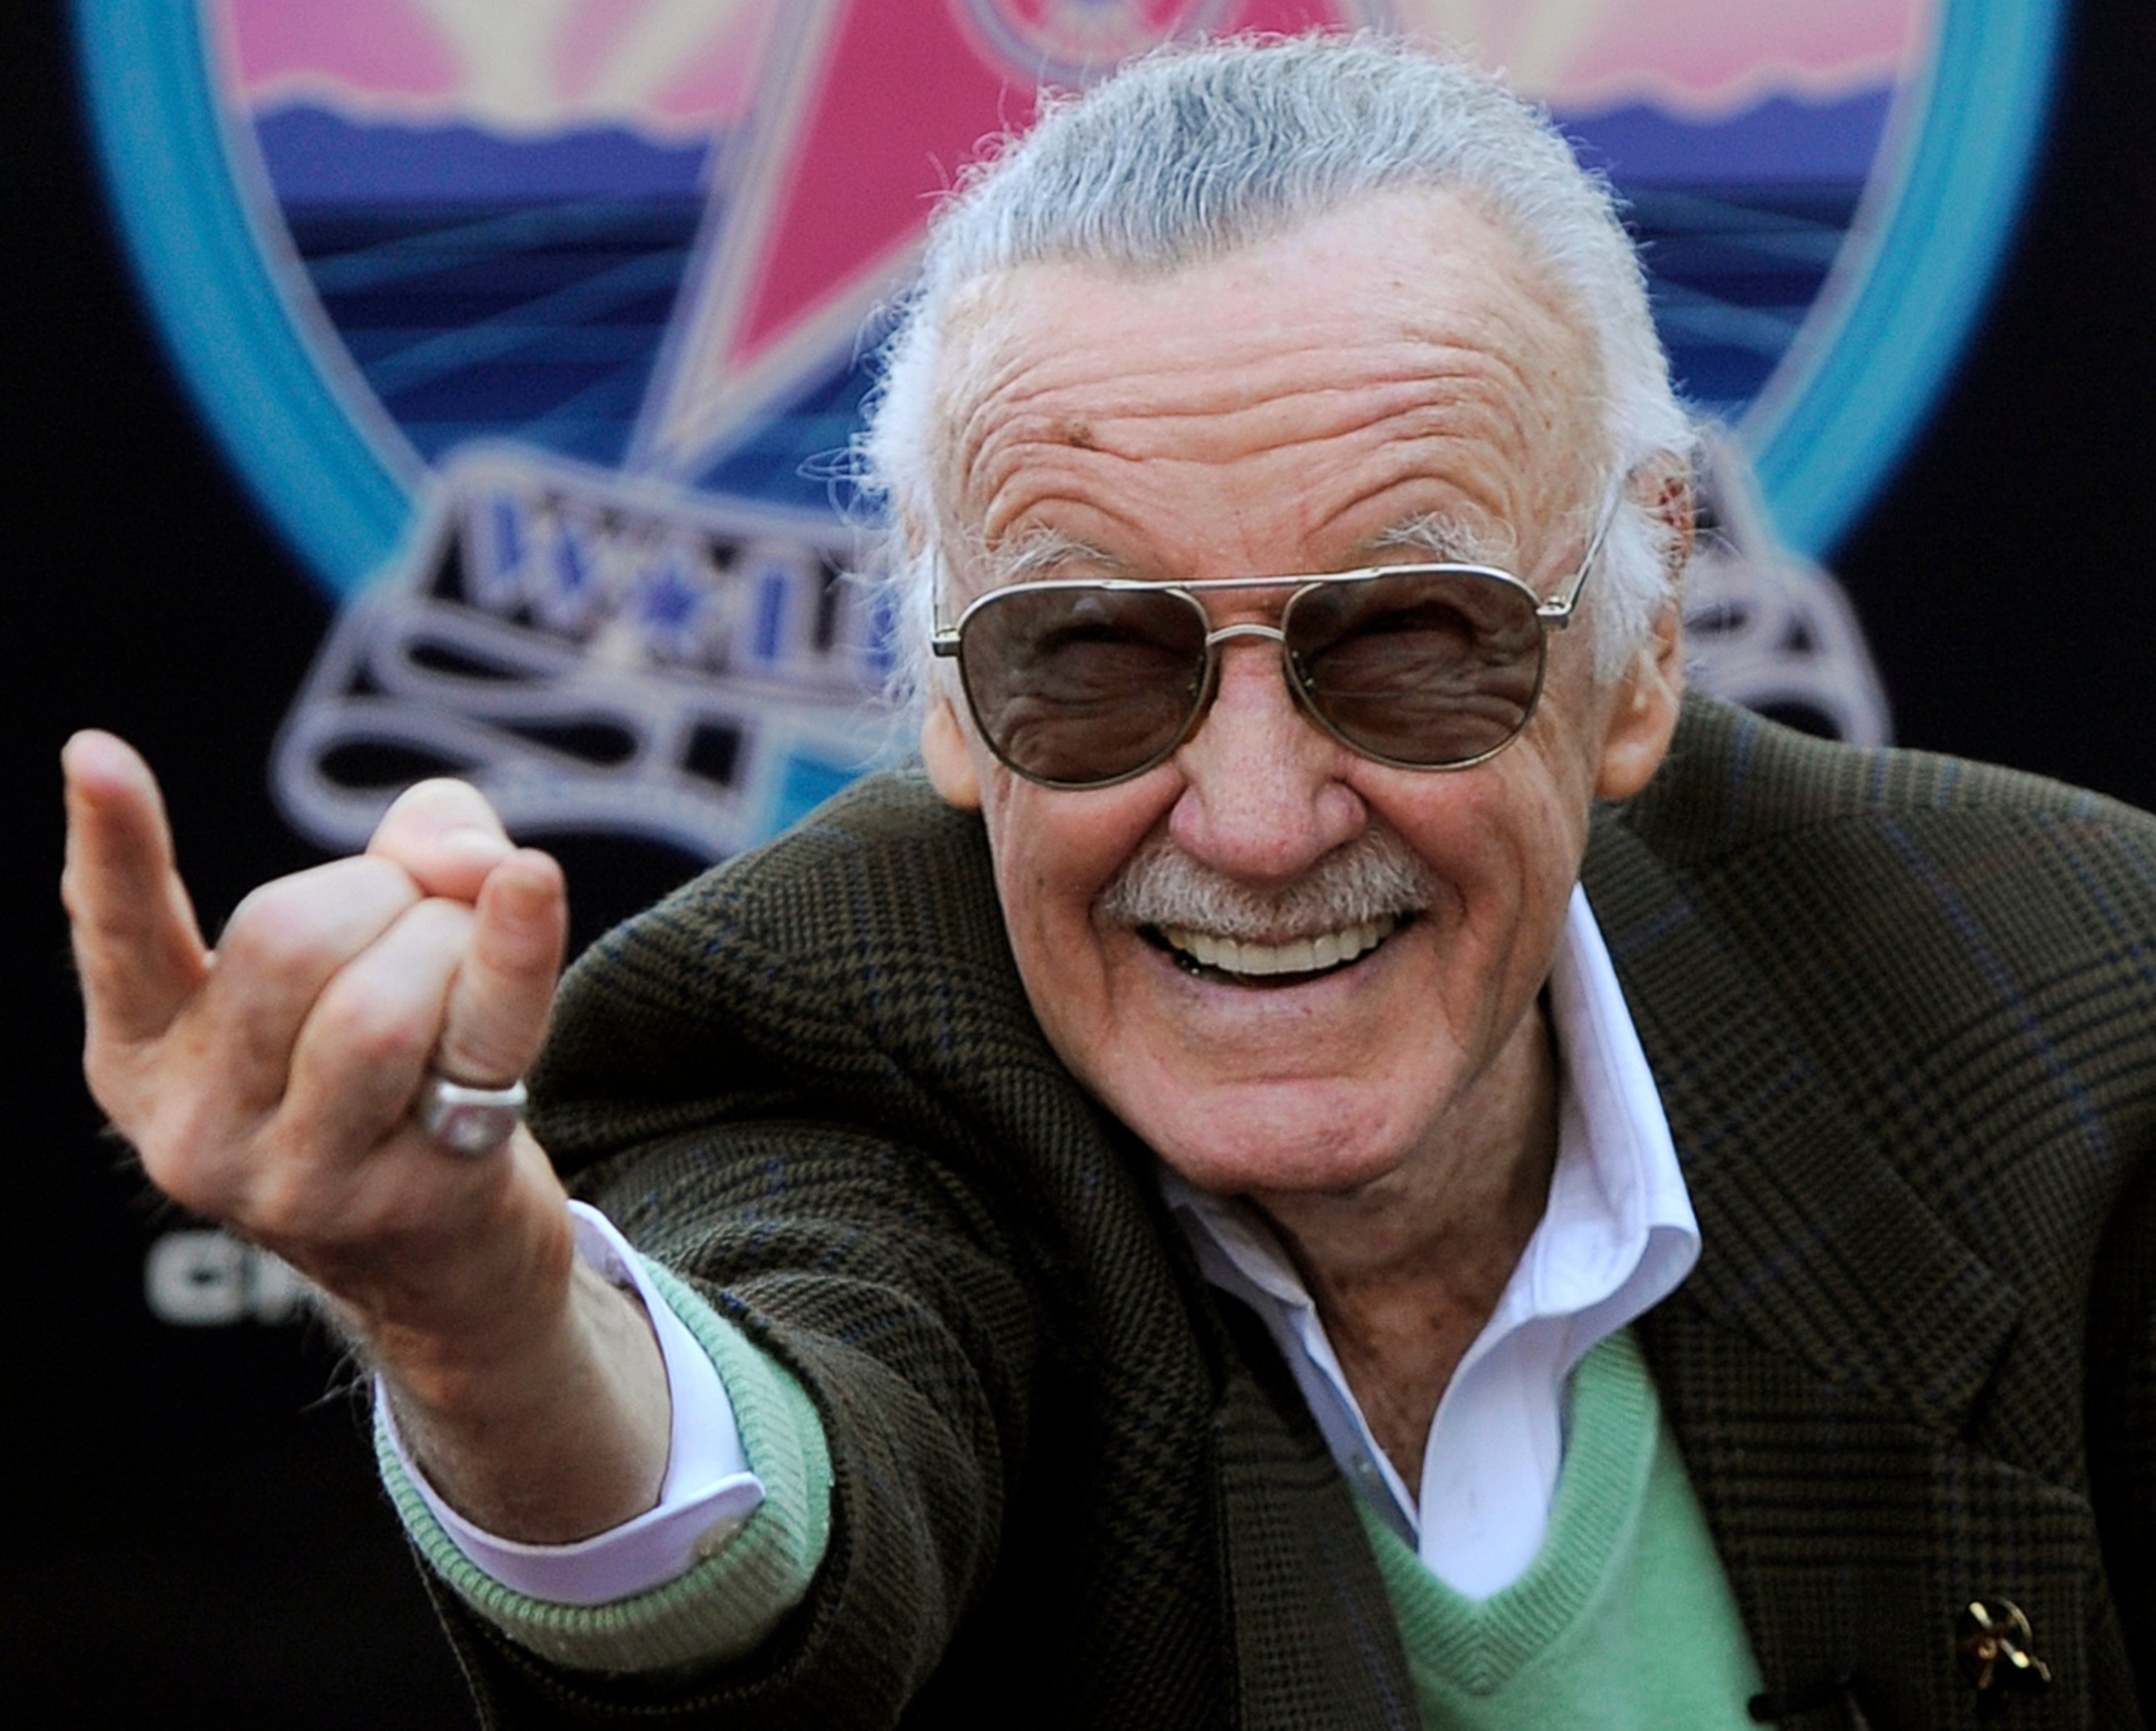 PHOTO: In this Jan. 4, 2011 file photo, Comic book creator Stan Lee strikes the Spiderman pose as he poses after receiving a star on the Hollywood Walk of Fame in Los Angeles.